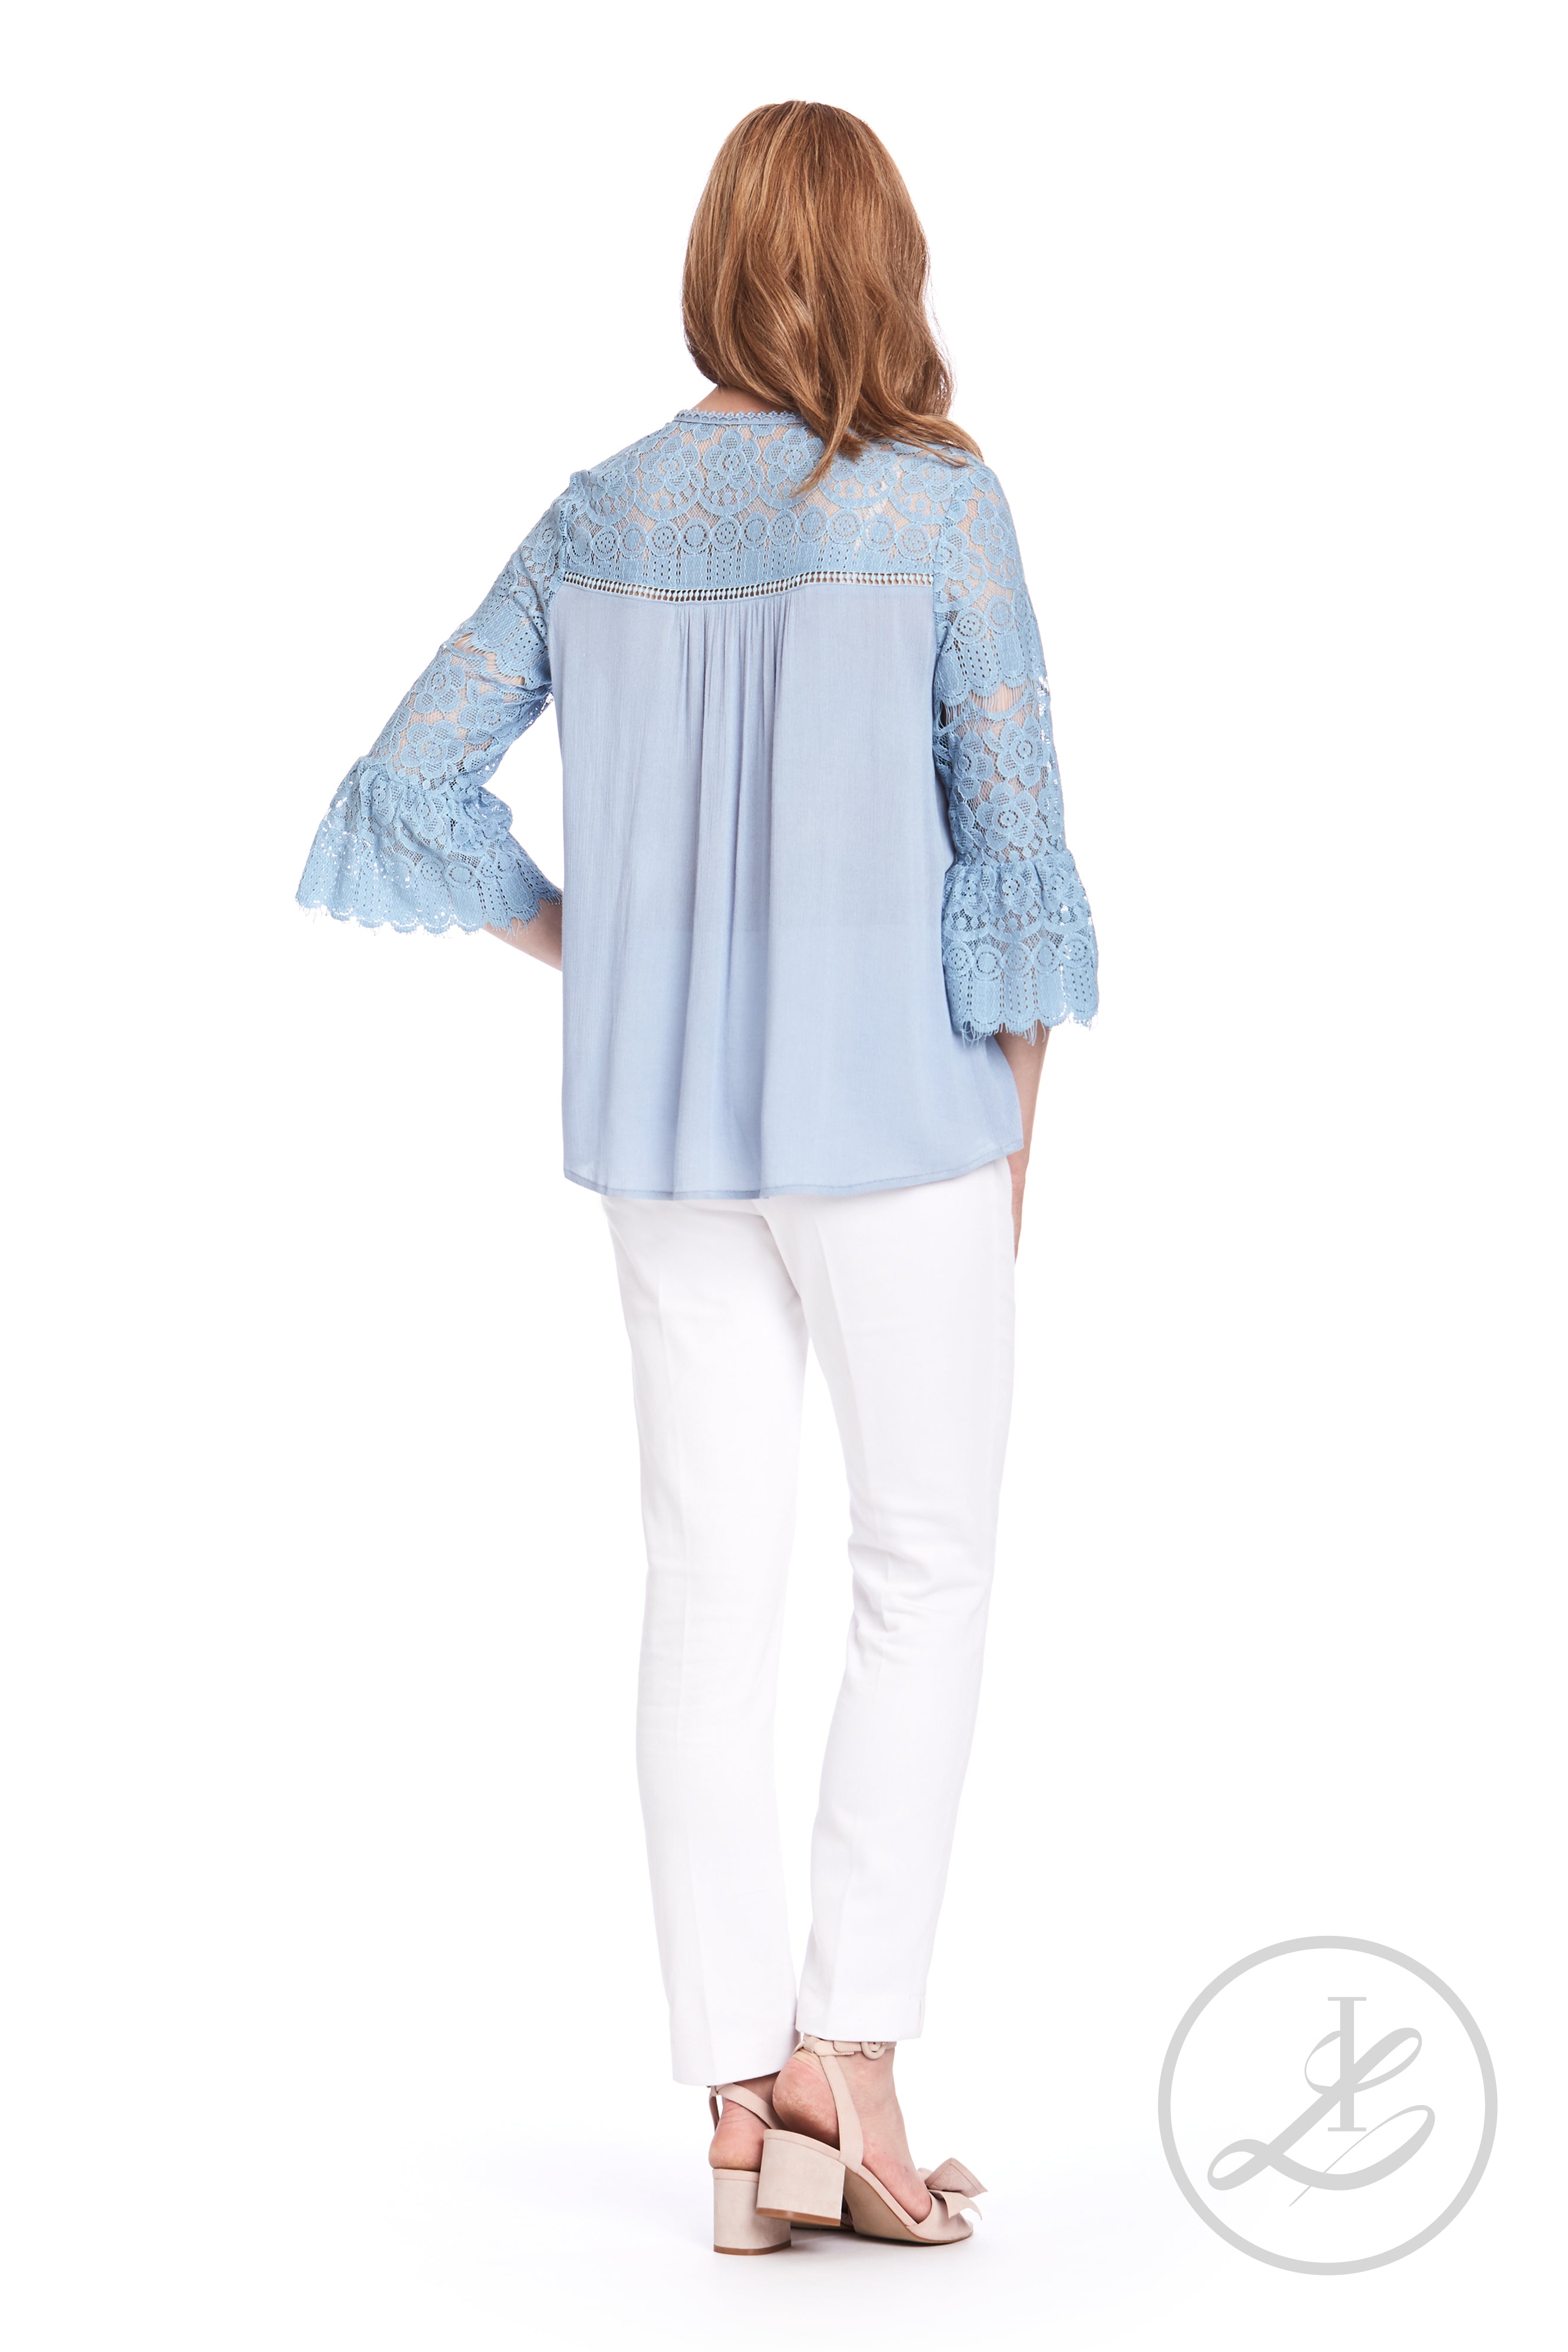 IL81035 (Pullover Top Only)  50% Off